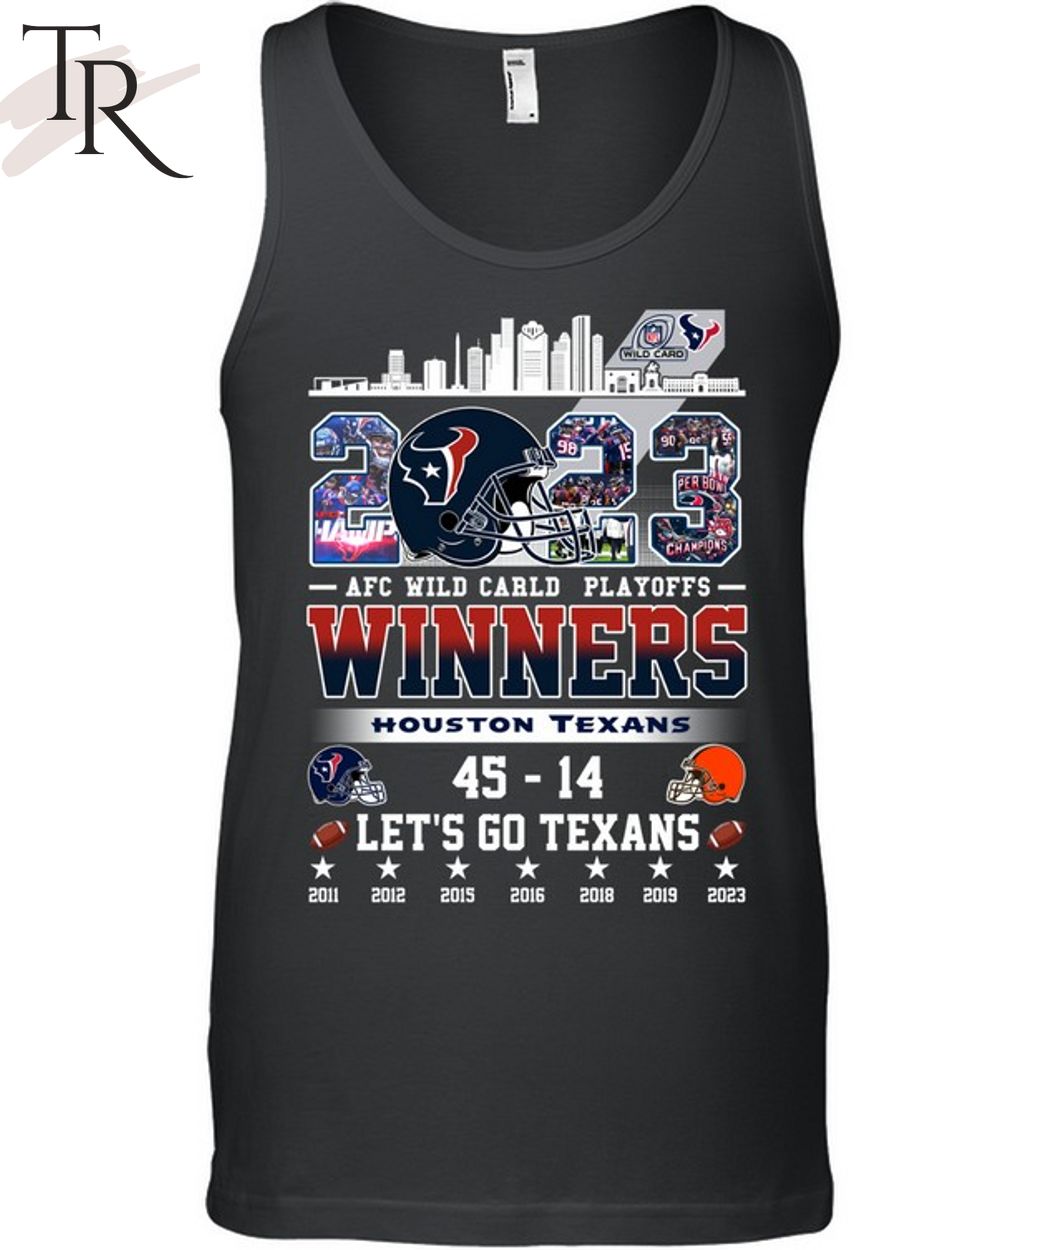 AFC Wild Carld Playoffs 2023 Winners Houston Texans 45 - 14 Cleveland Browns Let's Go Texans T-Shirt